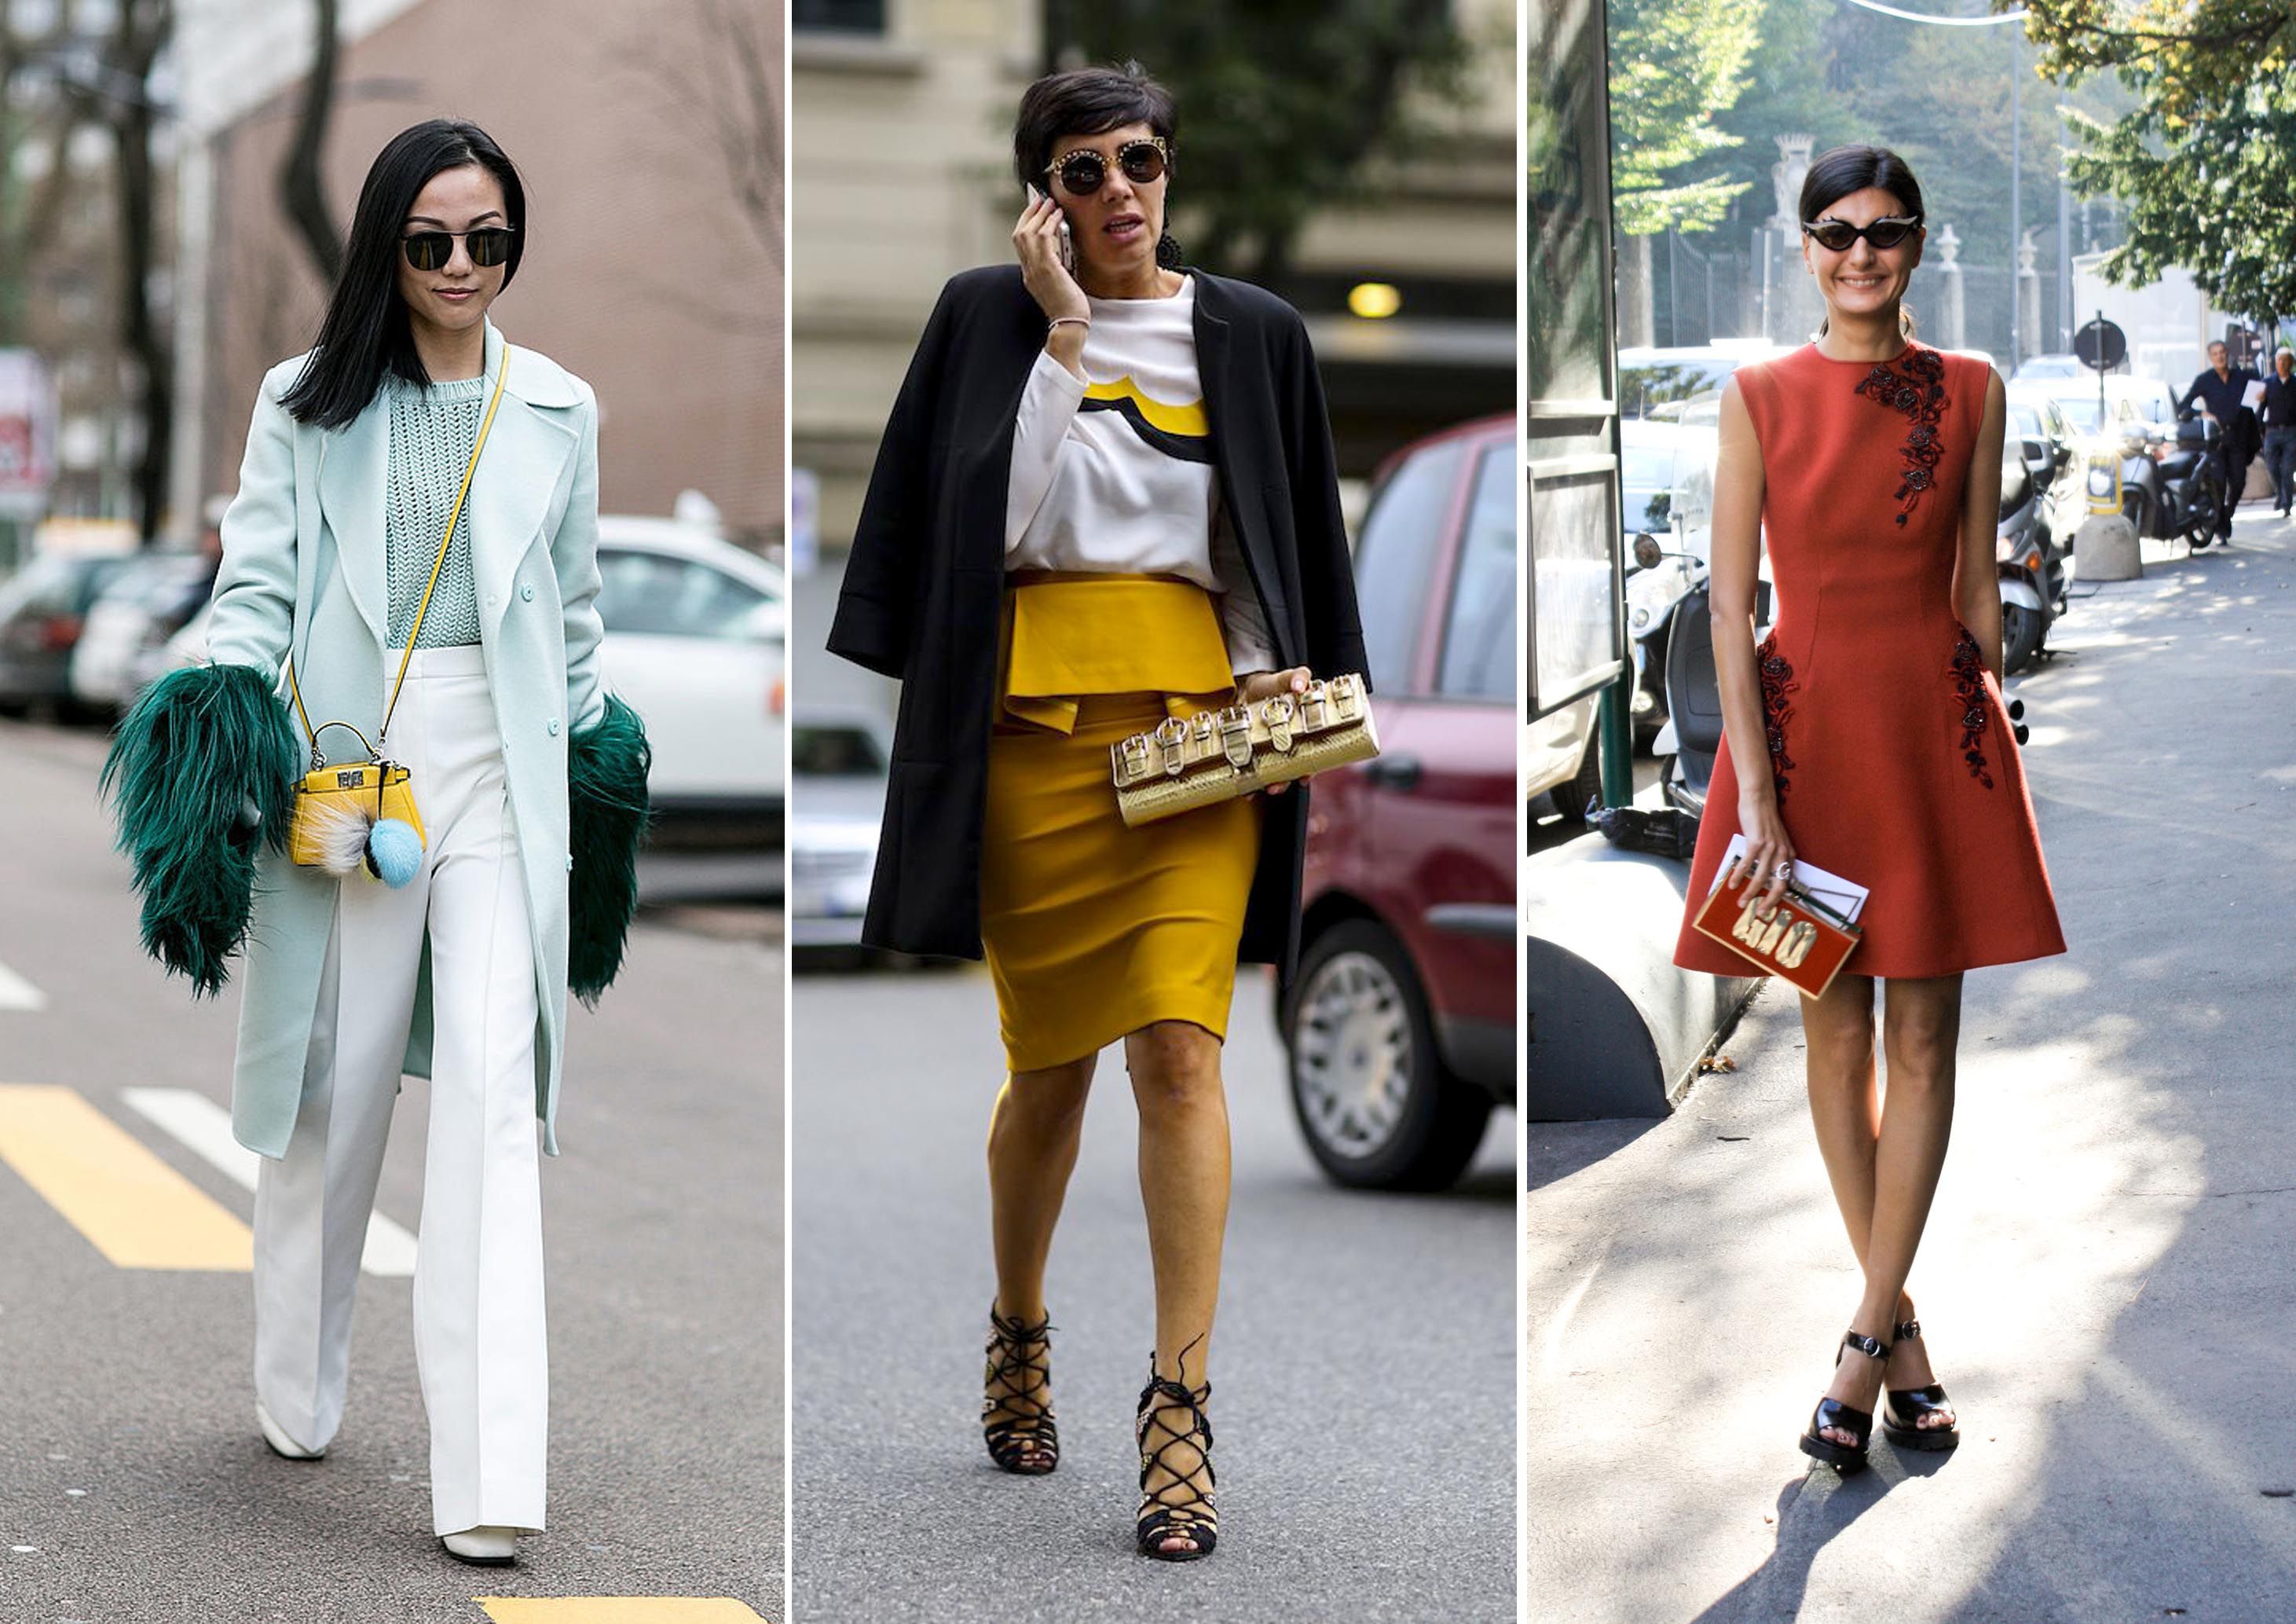 Street Style Inspiration from Fashion Week in the World's 4 Fashion Cities